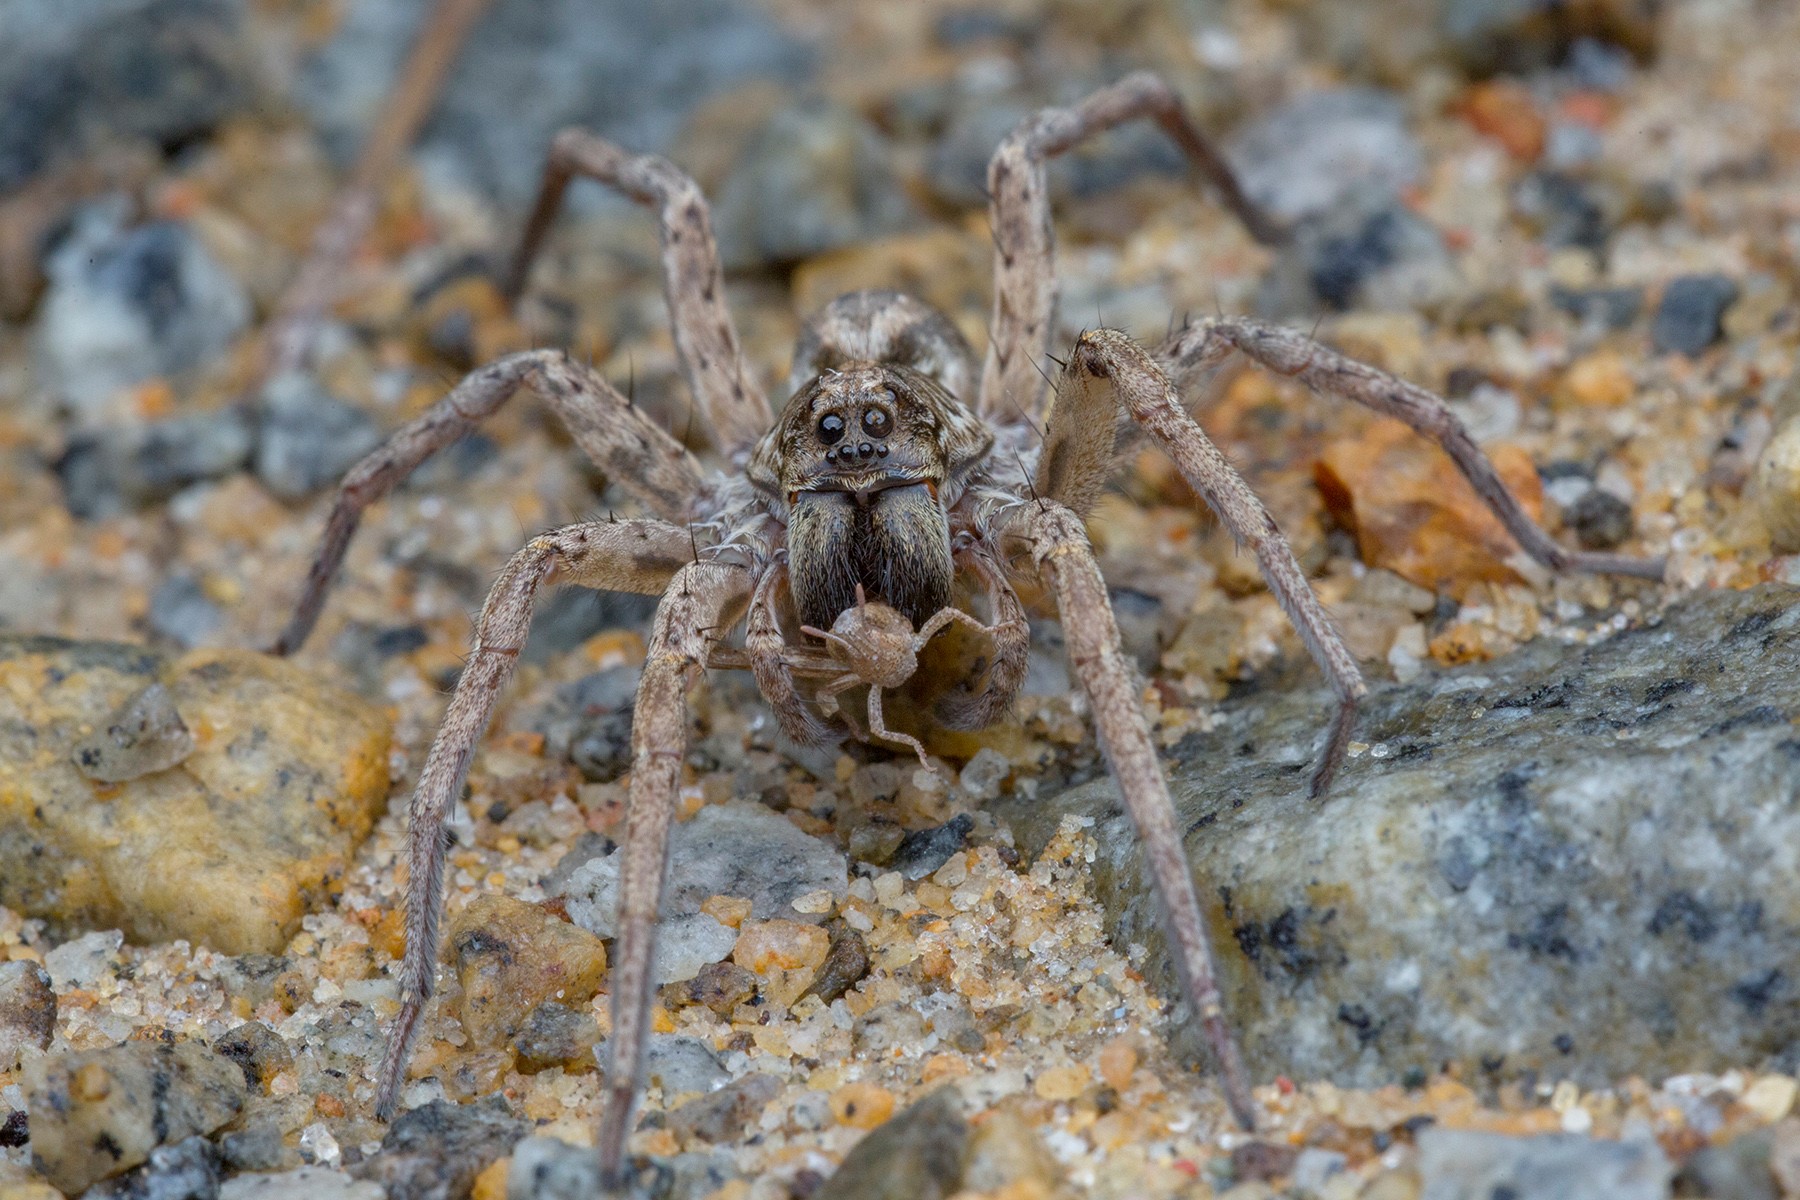 A close up shot of a brown-colored wolf spider eating a grasshopper.